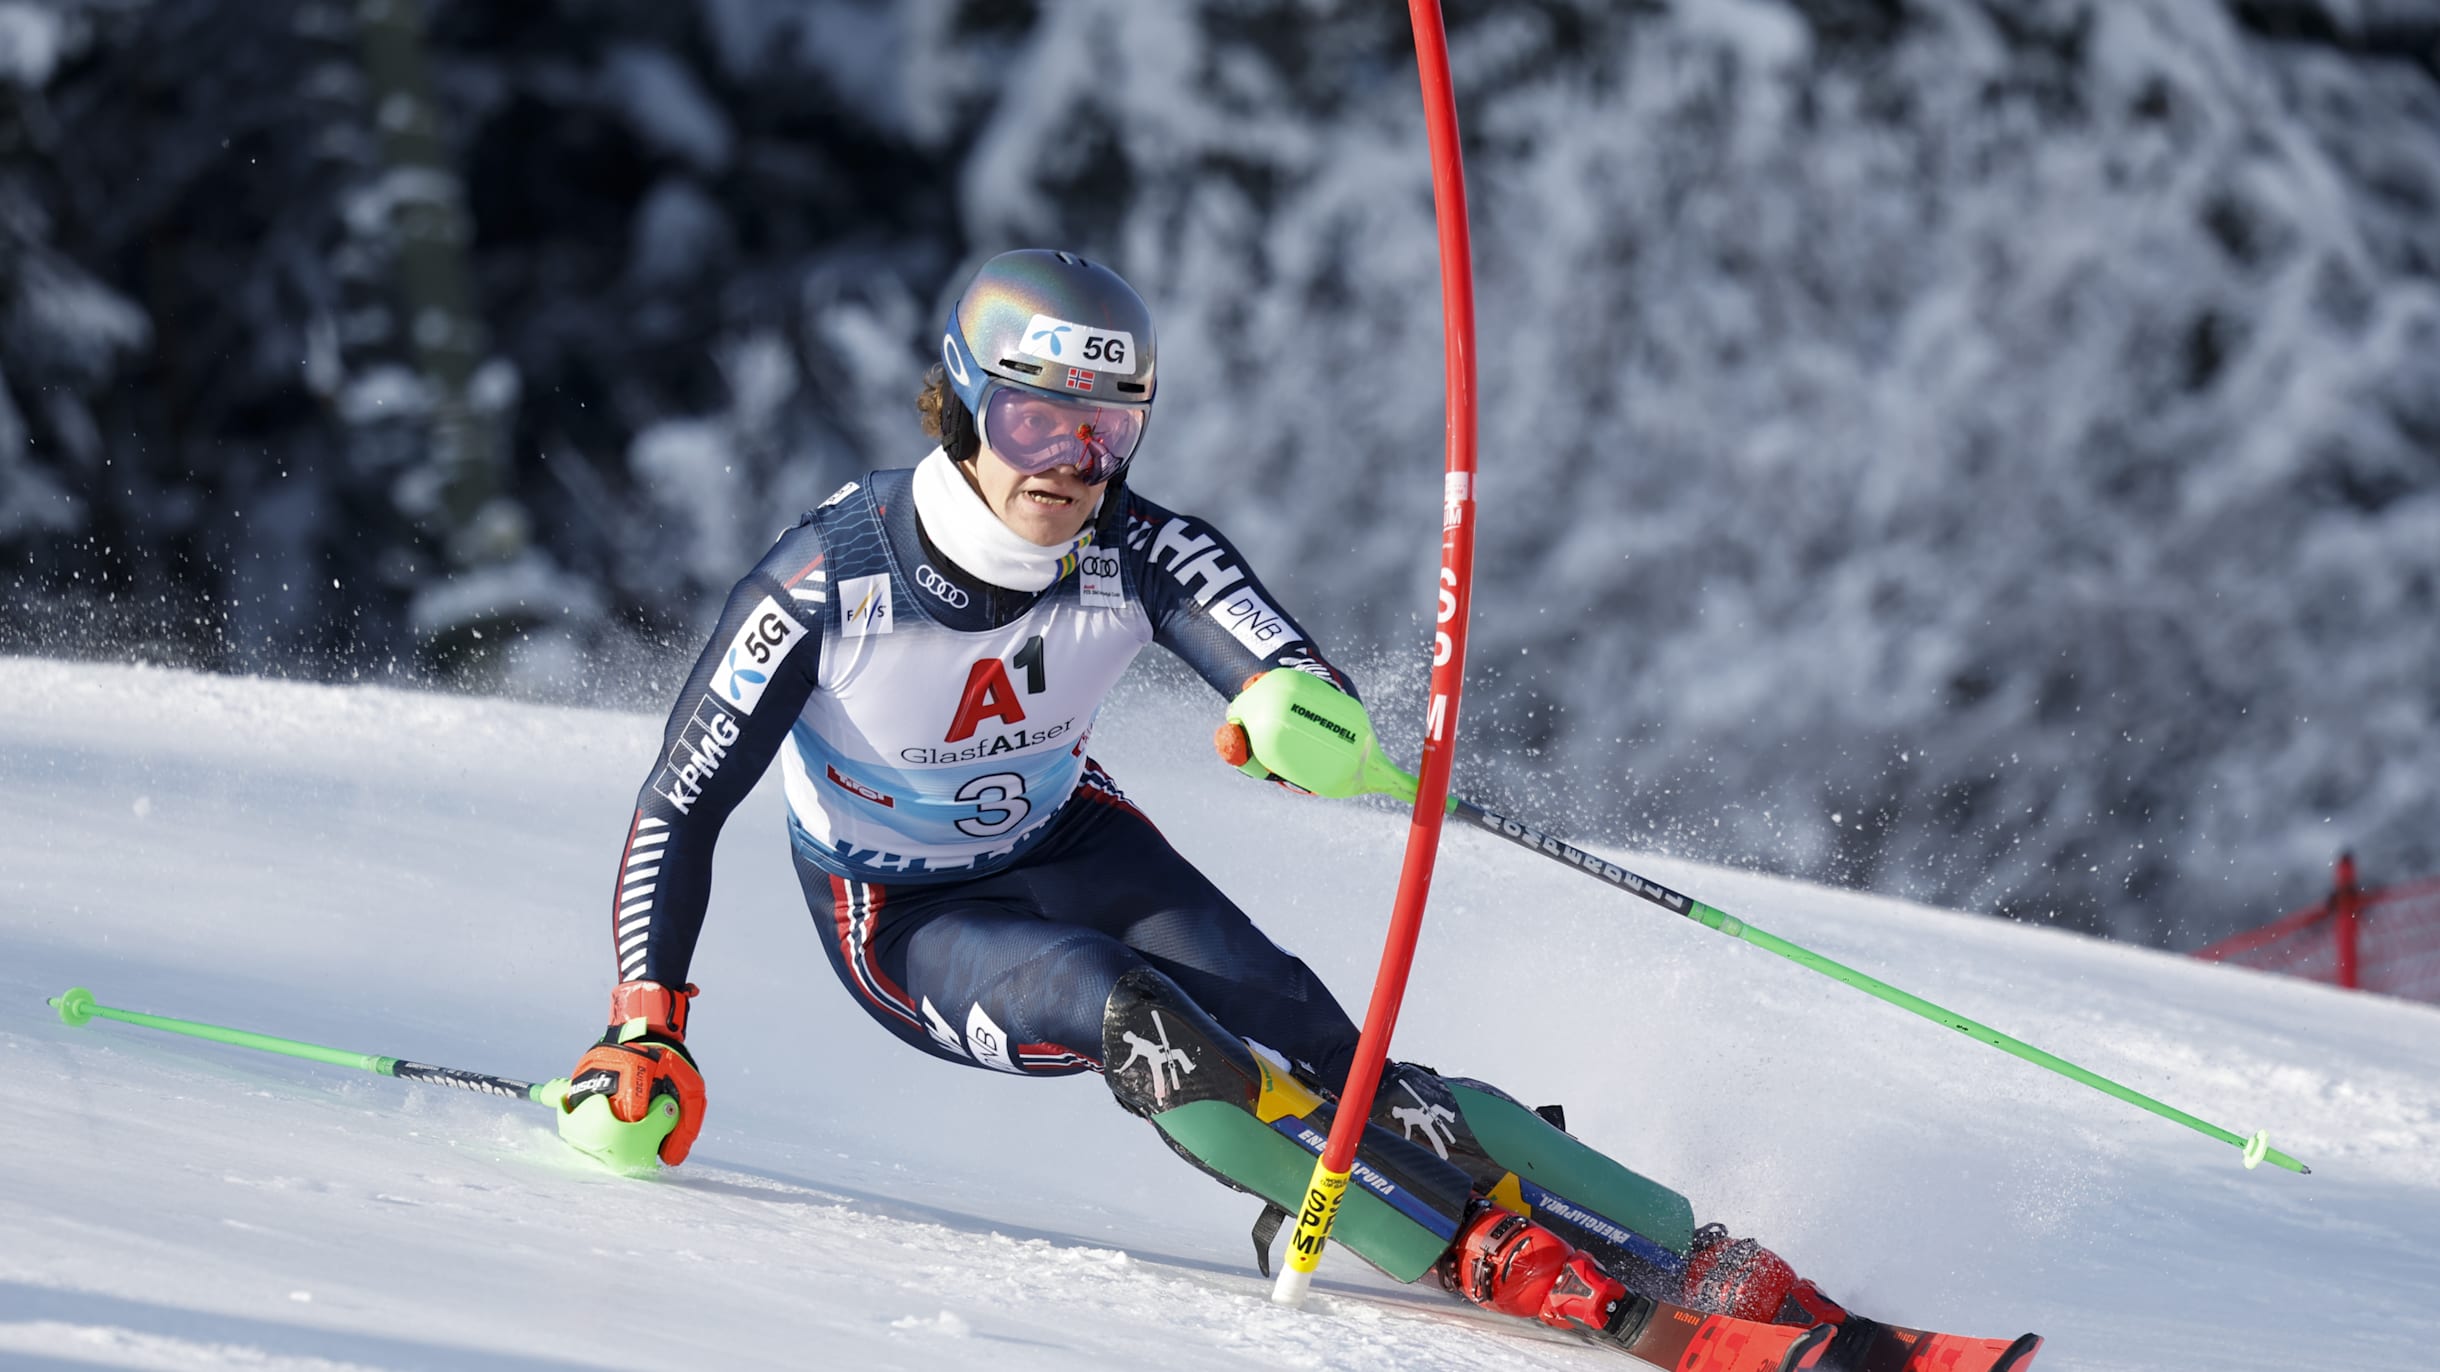 Live streaming, mens slalom at 2023 FIS Alpine Ski World Championships on 19 February Preview, schedule and how to watch